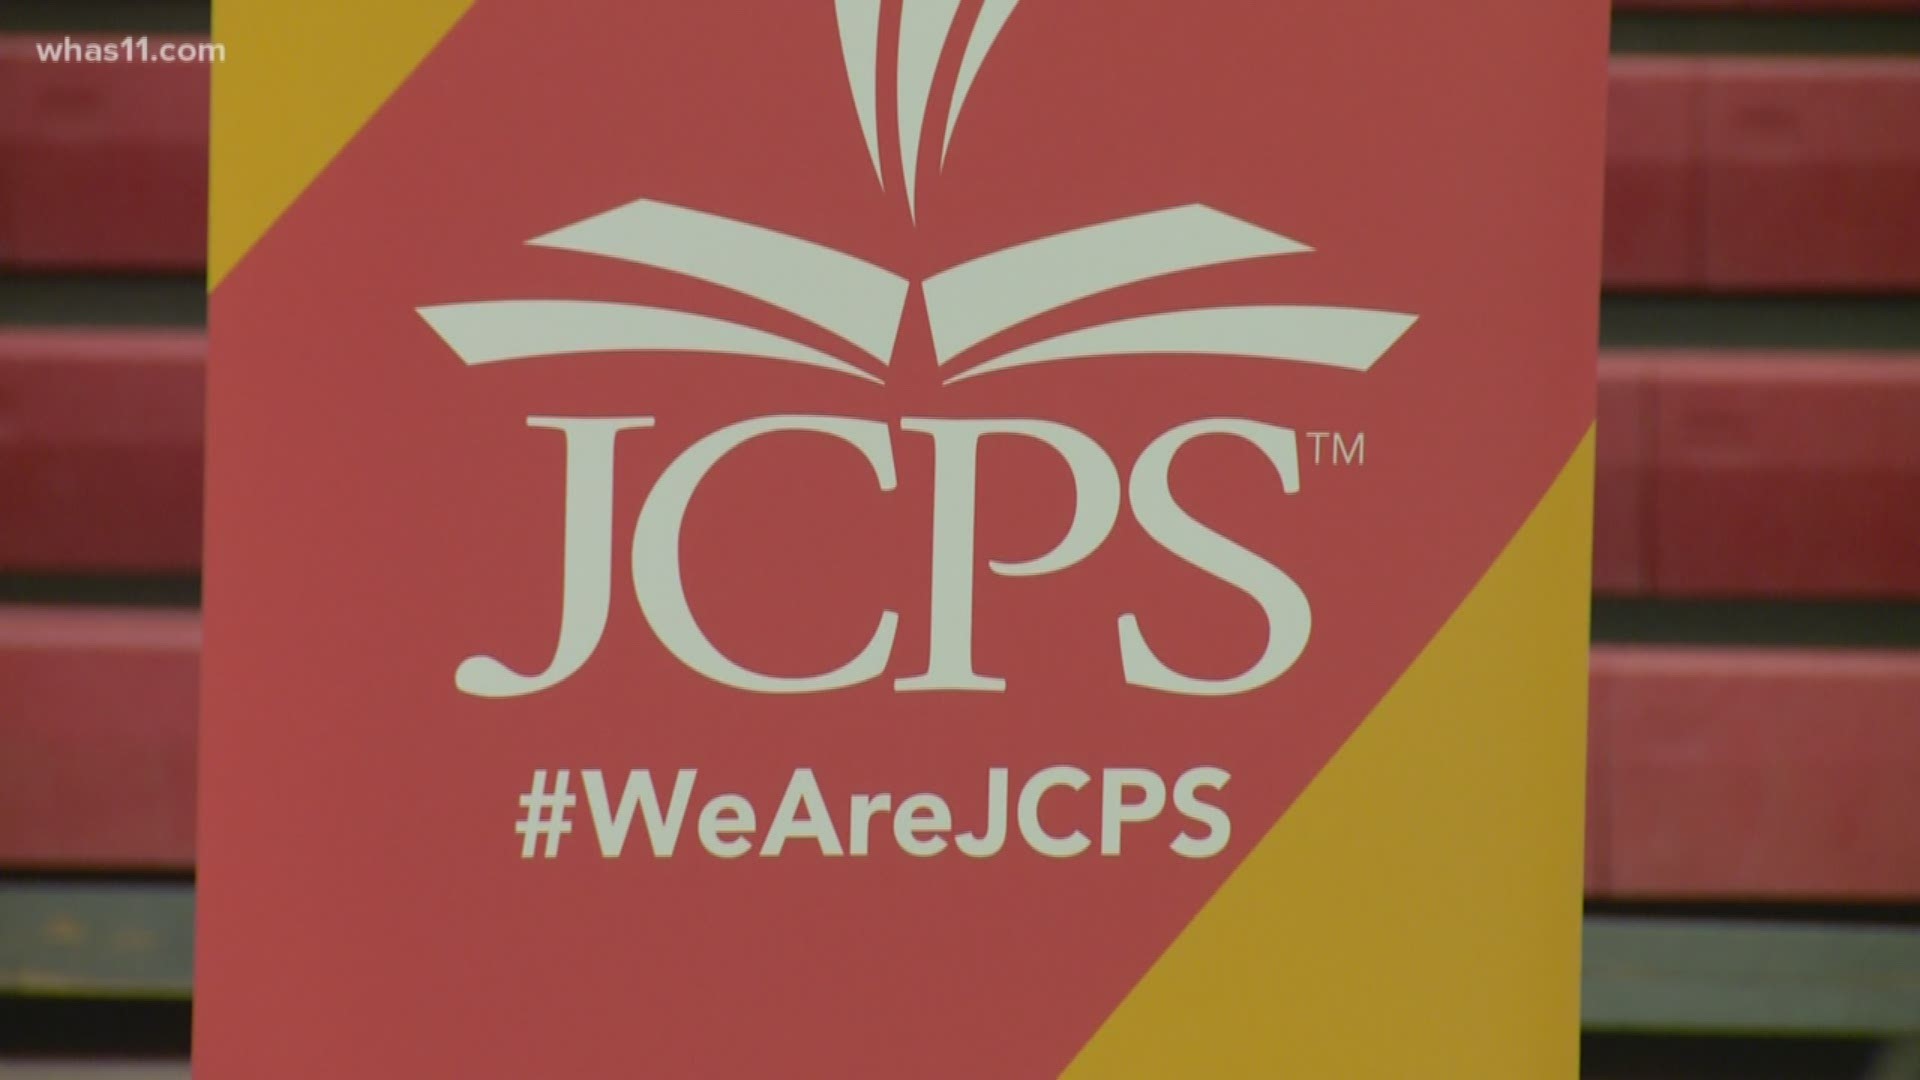 As a part of its racial equity goals JCPS will soon add Black Student Unions (BSU) at all middle and high schools.